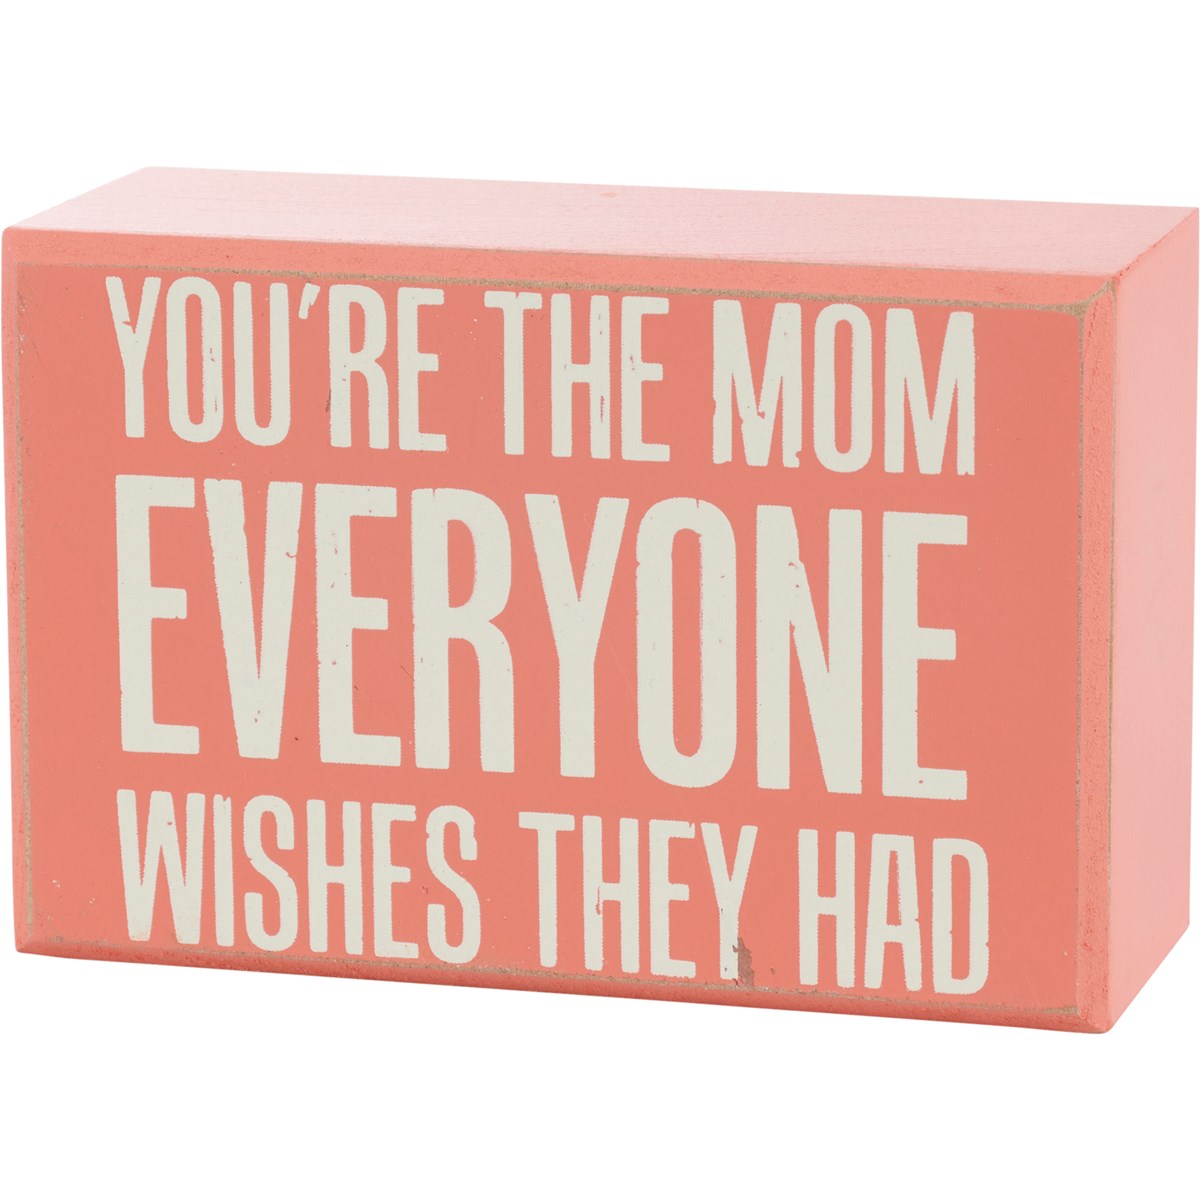 Mom Everyone Wishes Box Sign And Sock Set - Wood, Cotton, Nylon, Spandex